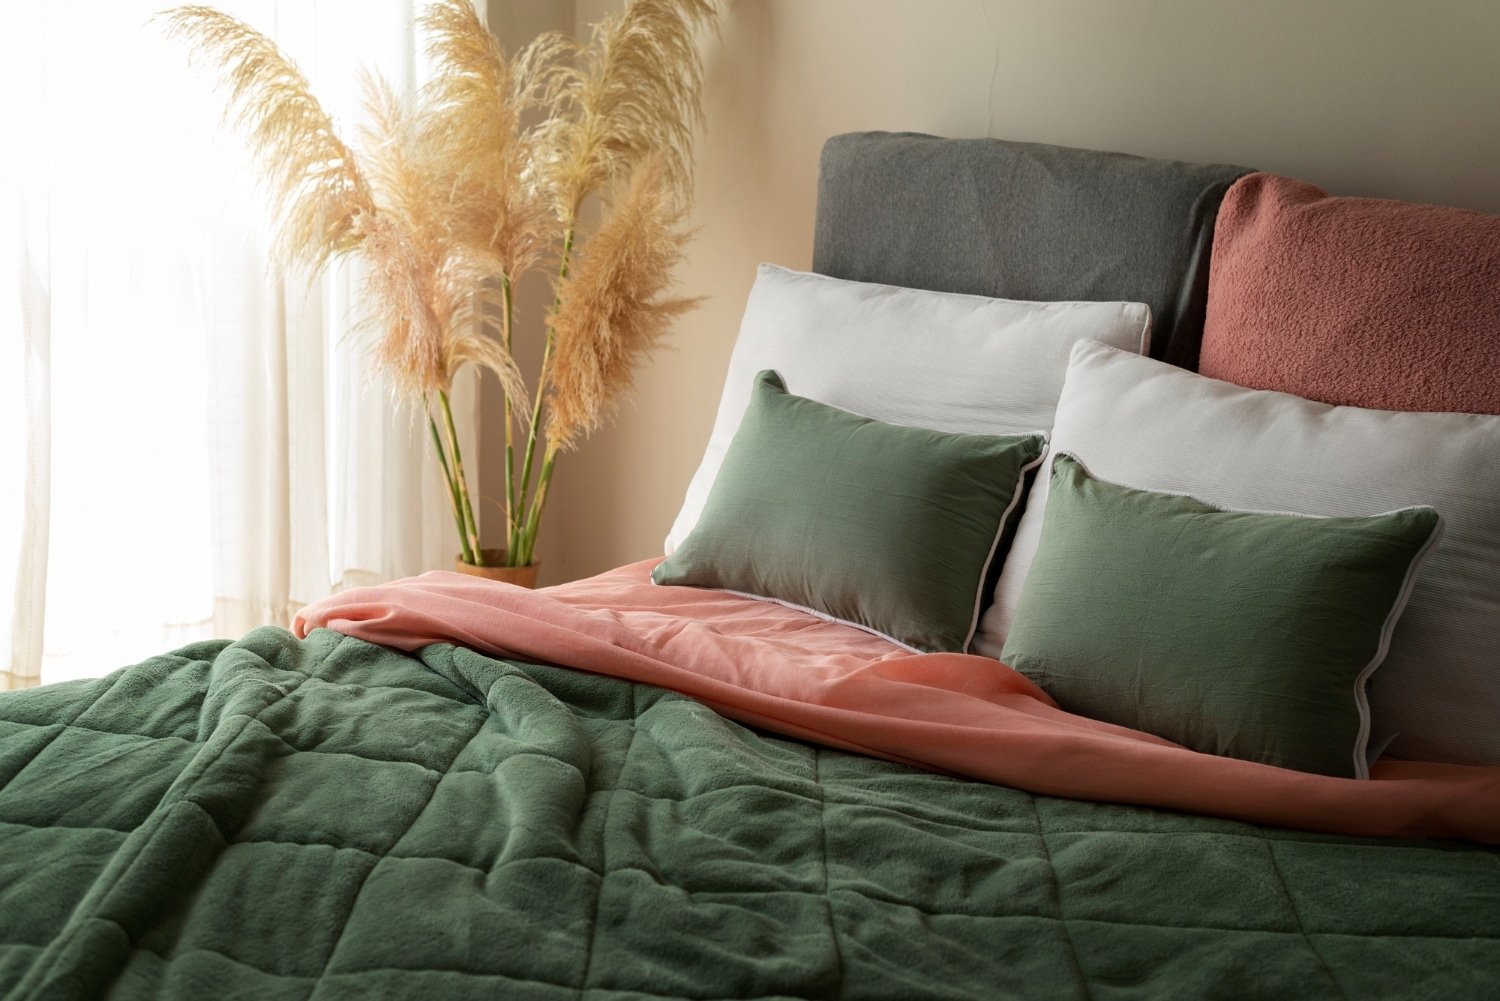 Refresh Your Bedroom With Bed Threads’ Sustainable Linens